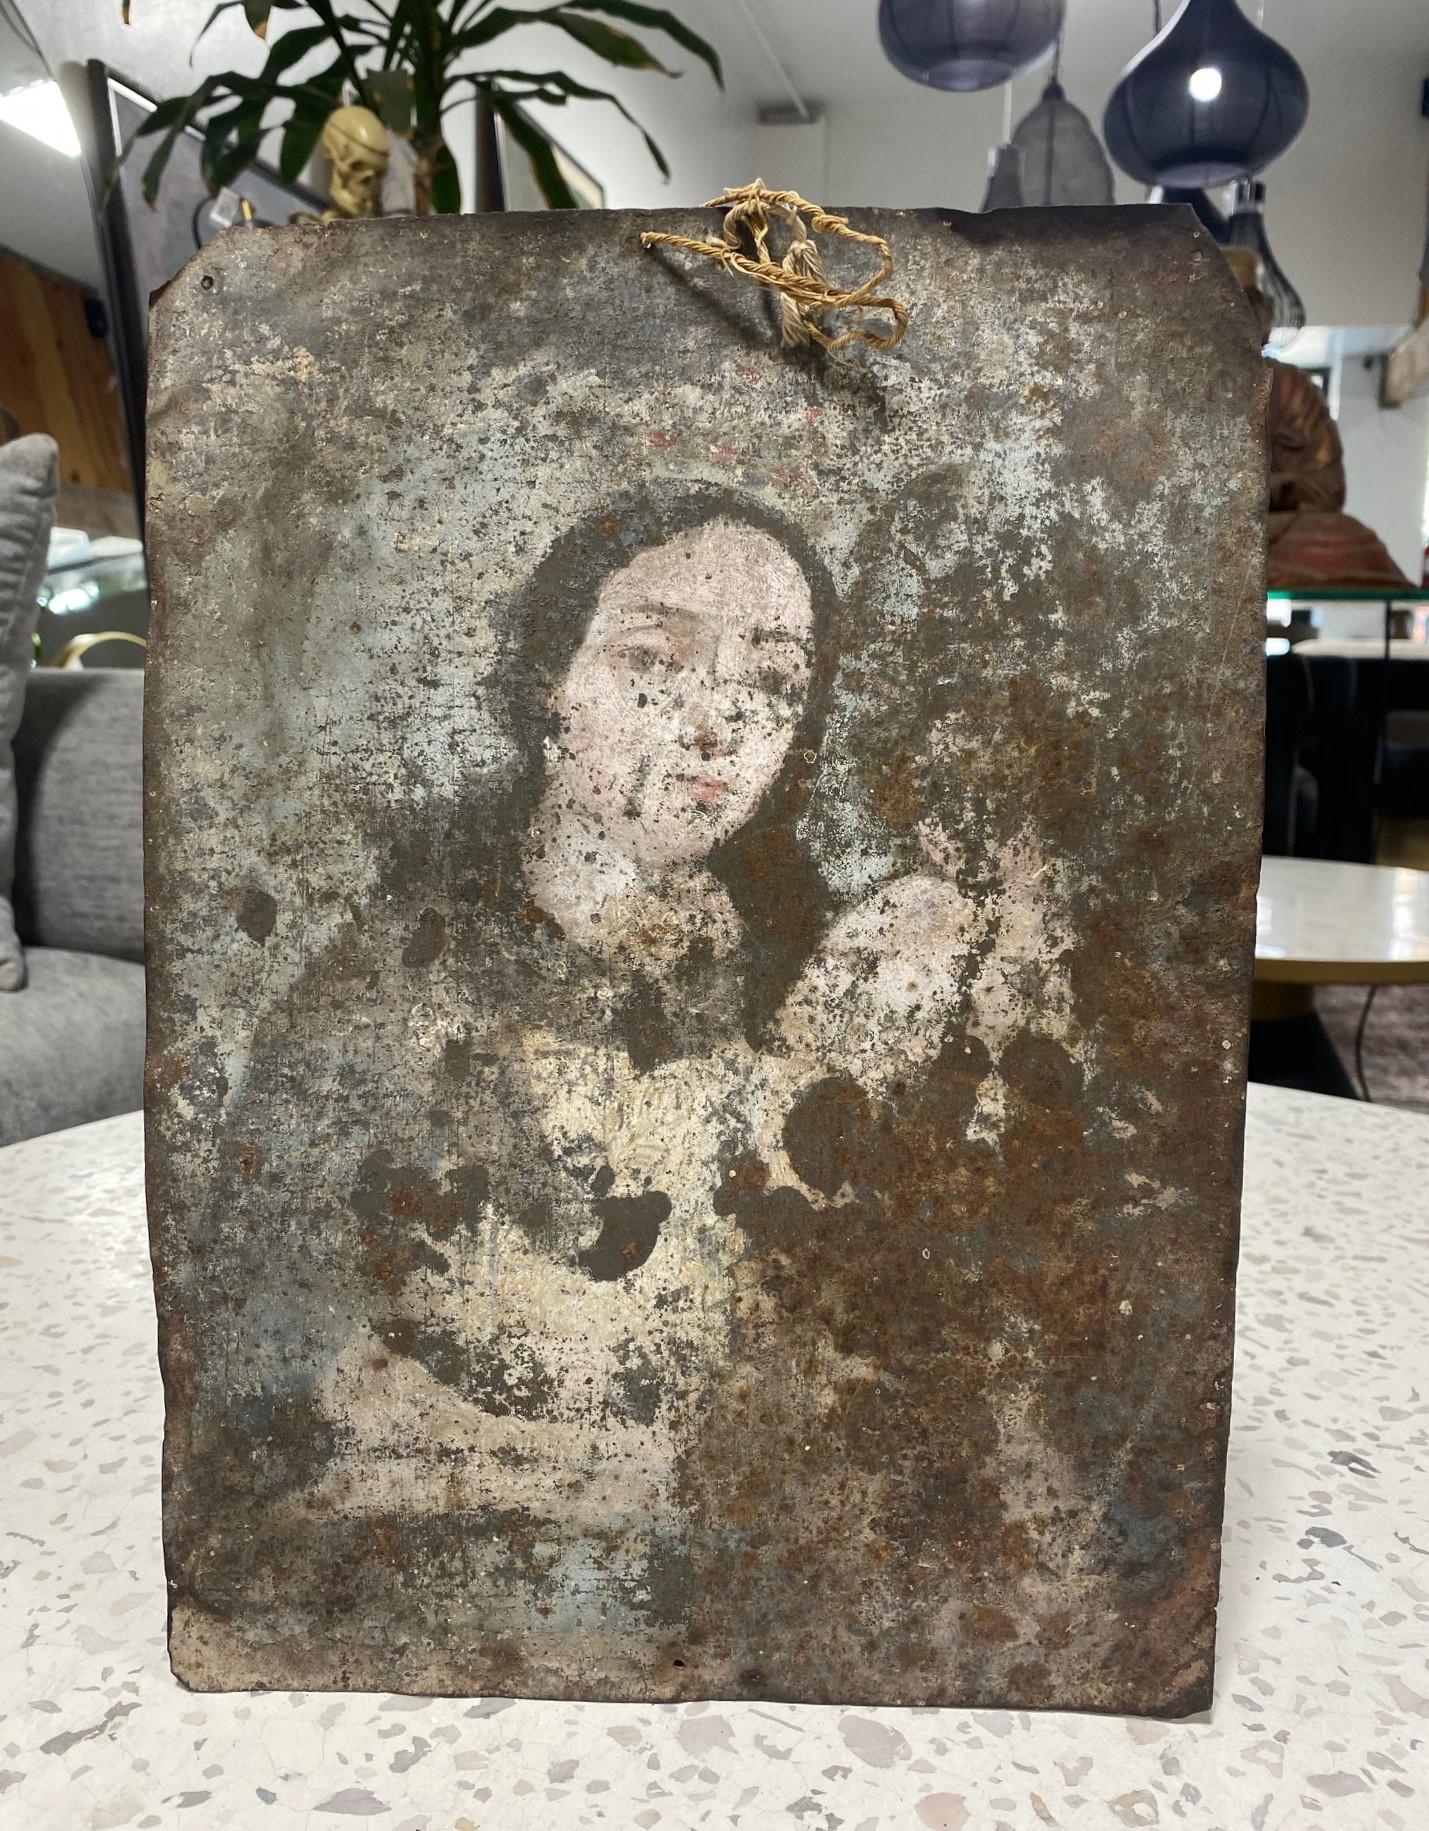 A beautiful 19th-century Spanish Colonial Mexican Folk Art ex-voto retablo lámina painting featuring Mother Mary with the infant Jesus Christ (faded and now almost a ghost-like figure) in her arms.  A beautiful, mesmeric image.  

The work is